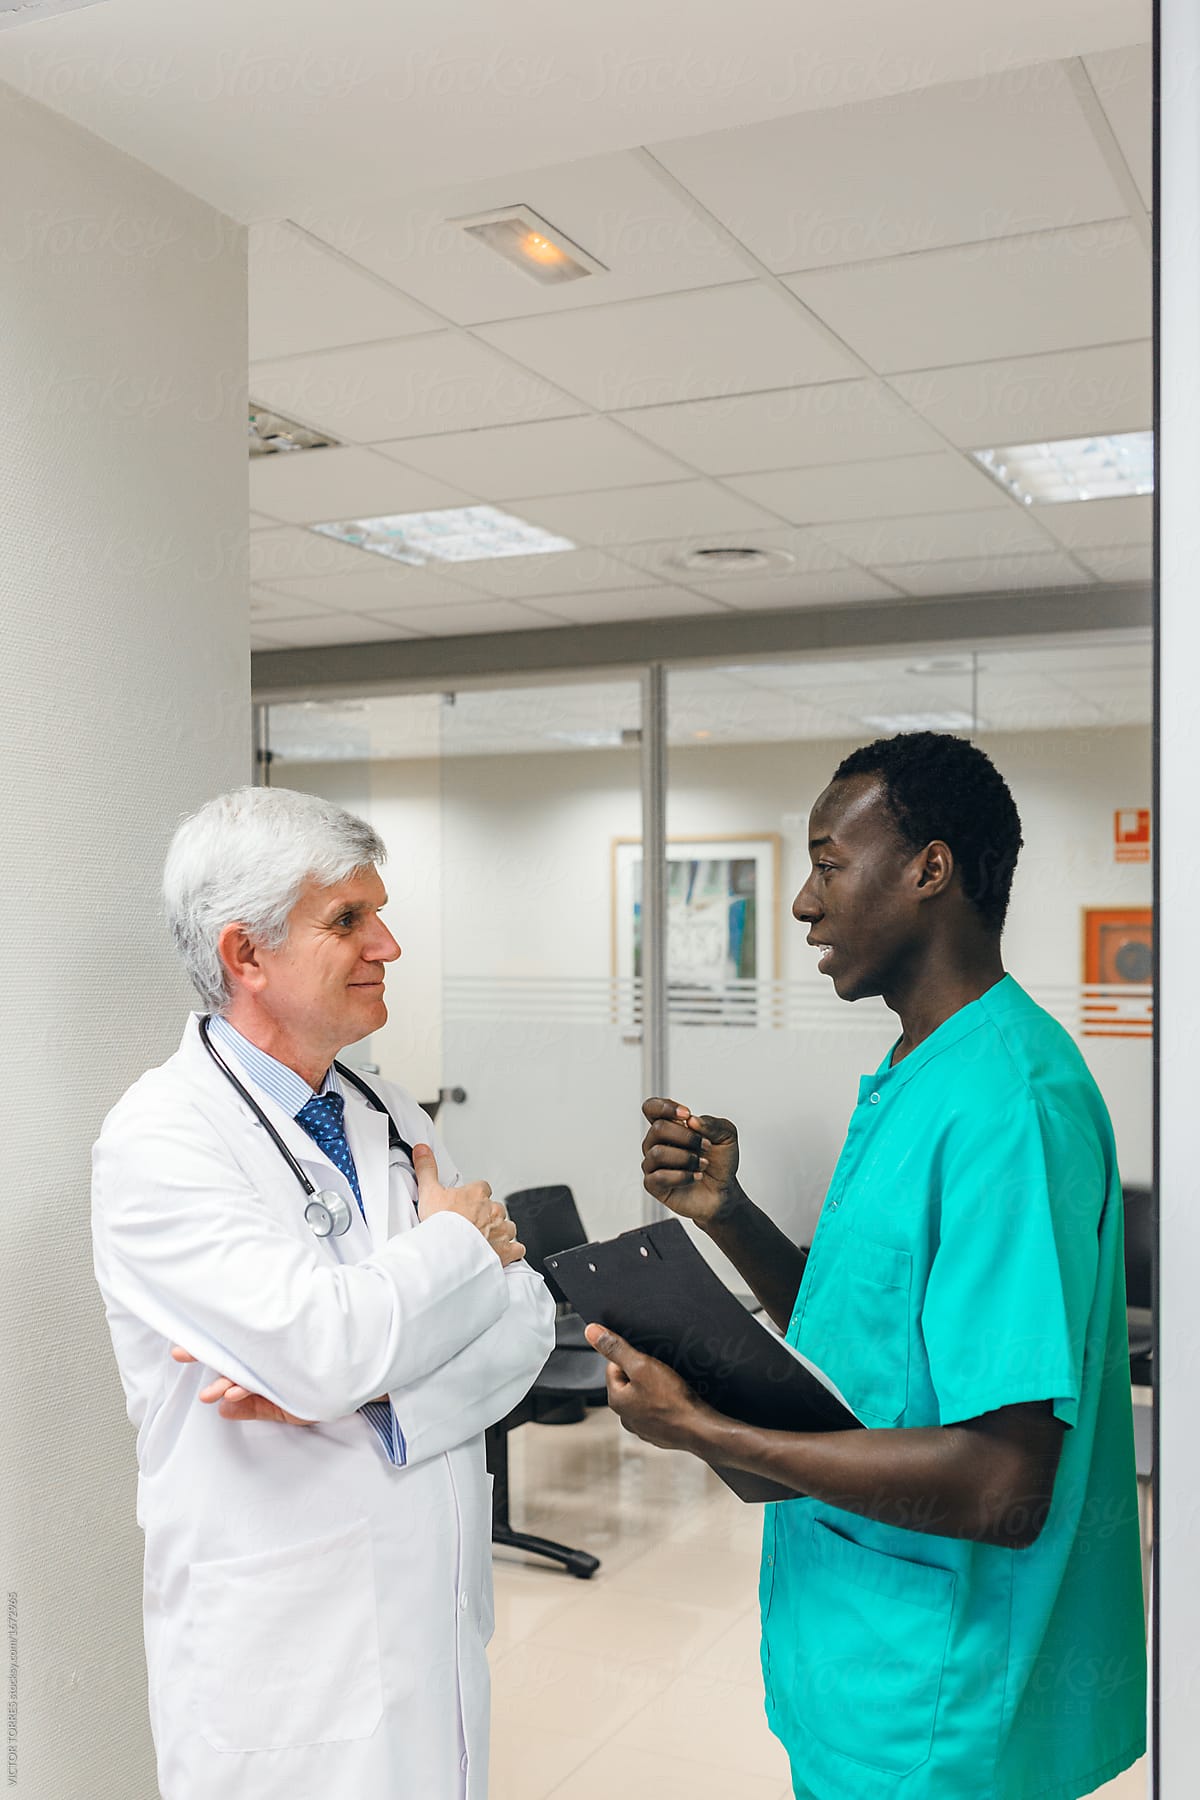 Doctors standing and communicating in hospital.